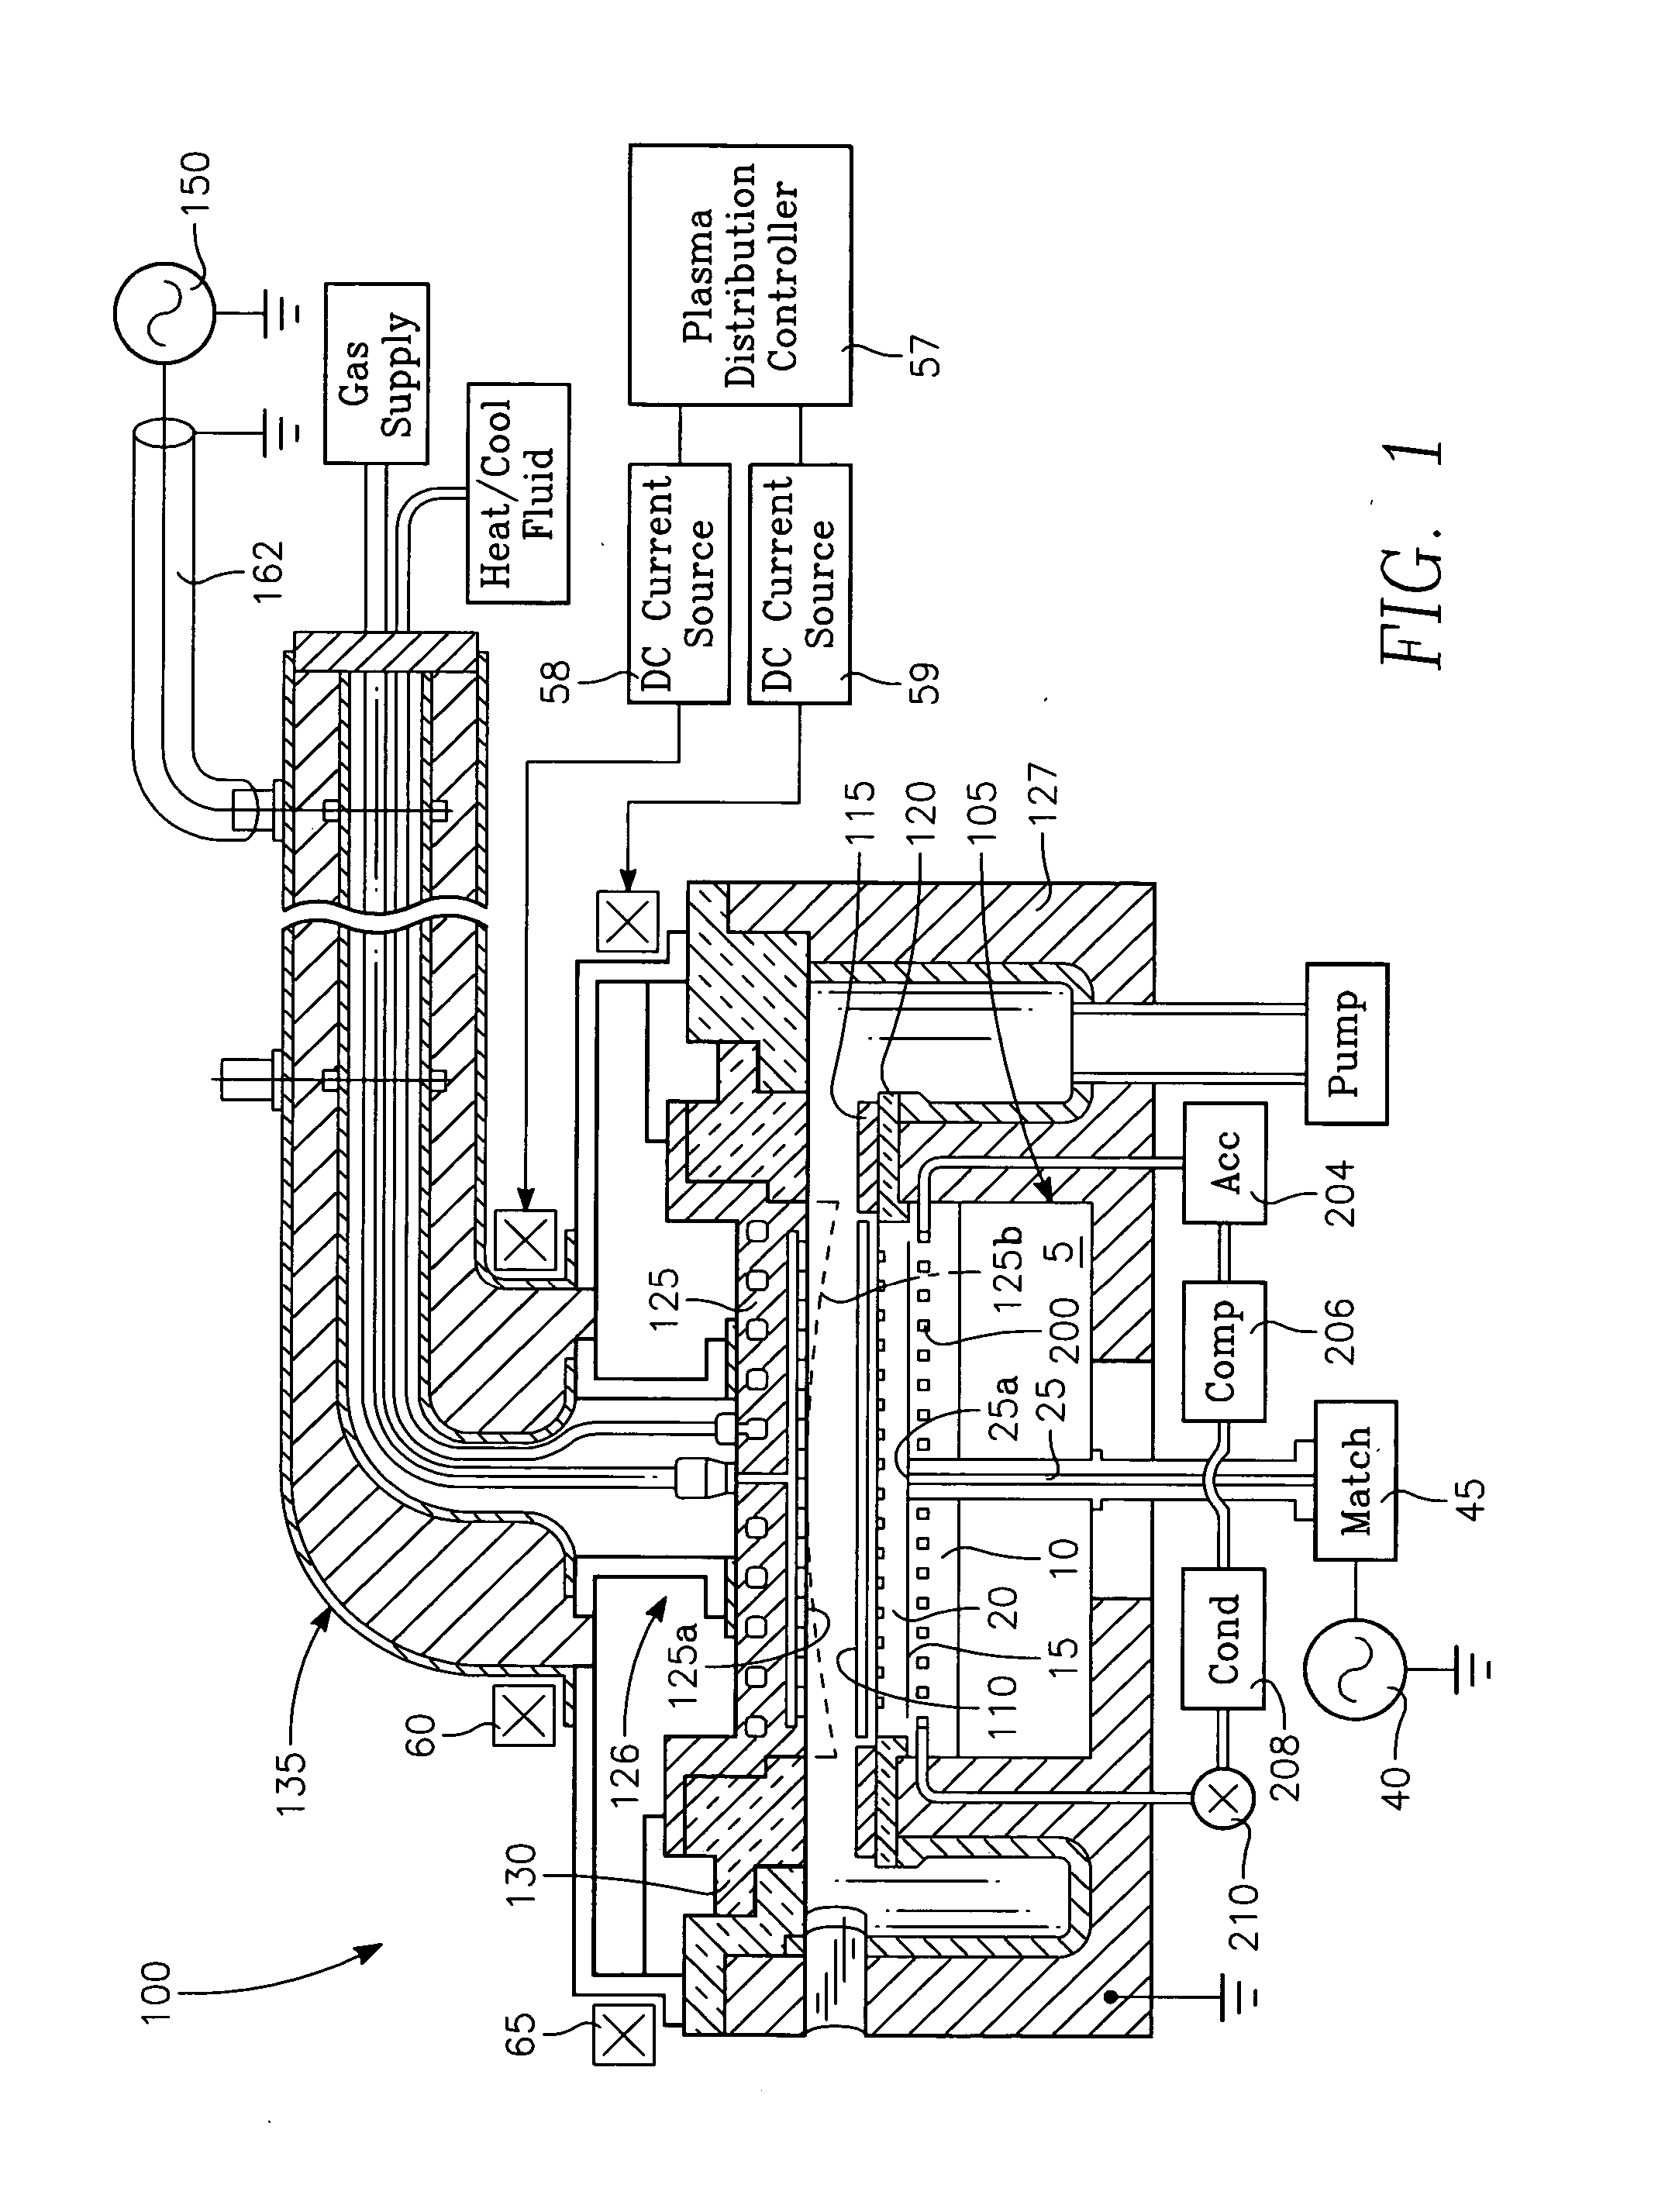 Plasma reactor with wafer backside thermal loop, two-phase internal pedestal thermal loop and a control processor governing both loops